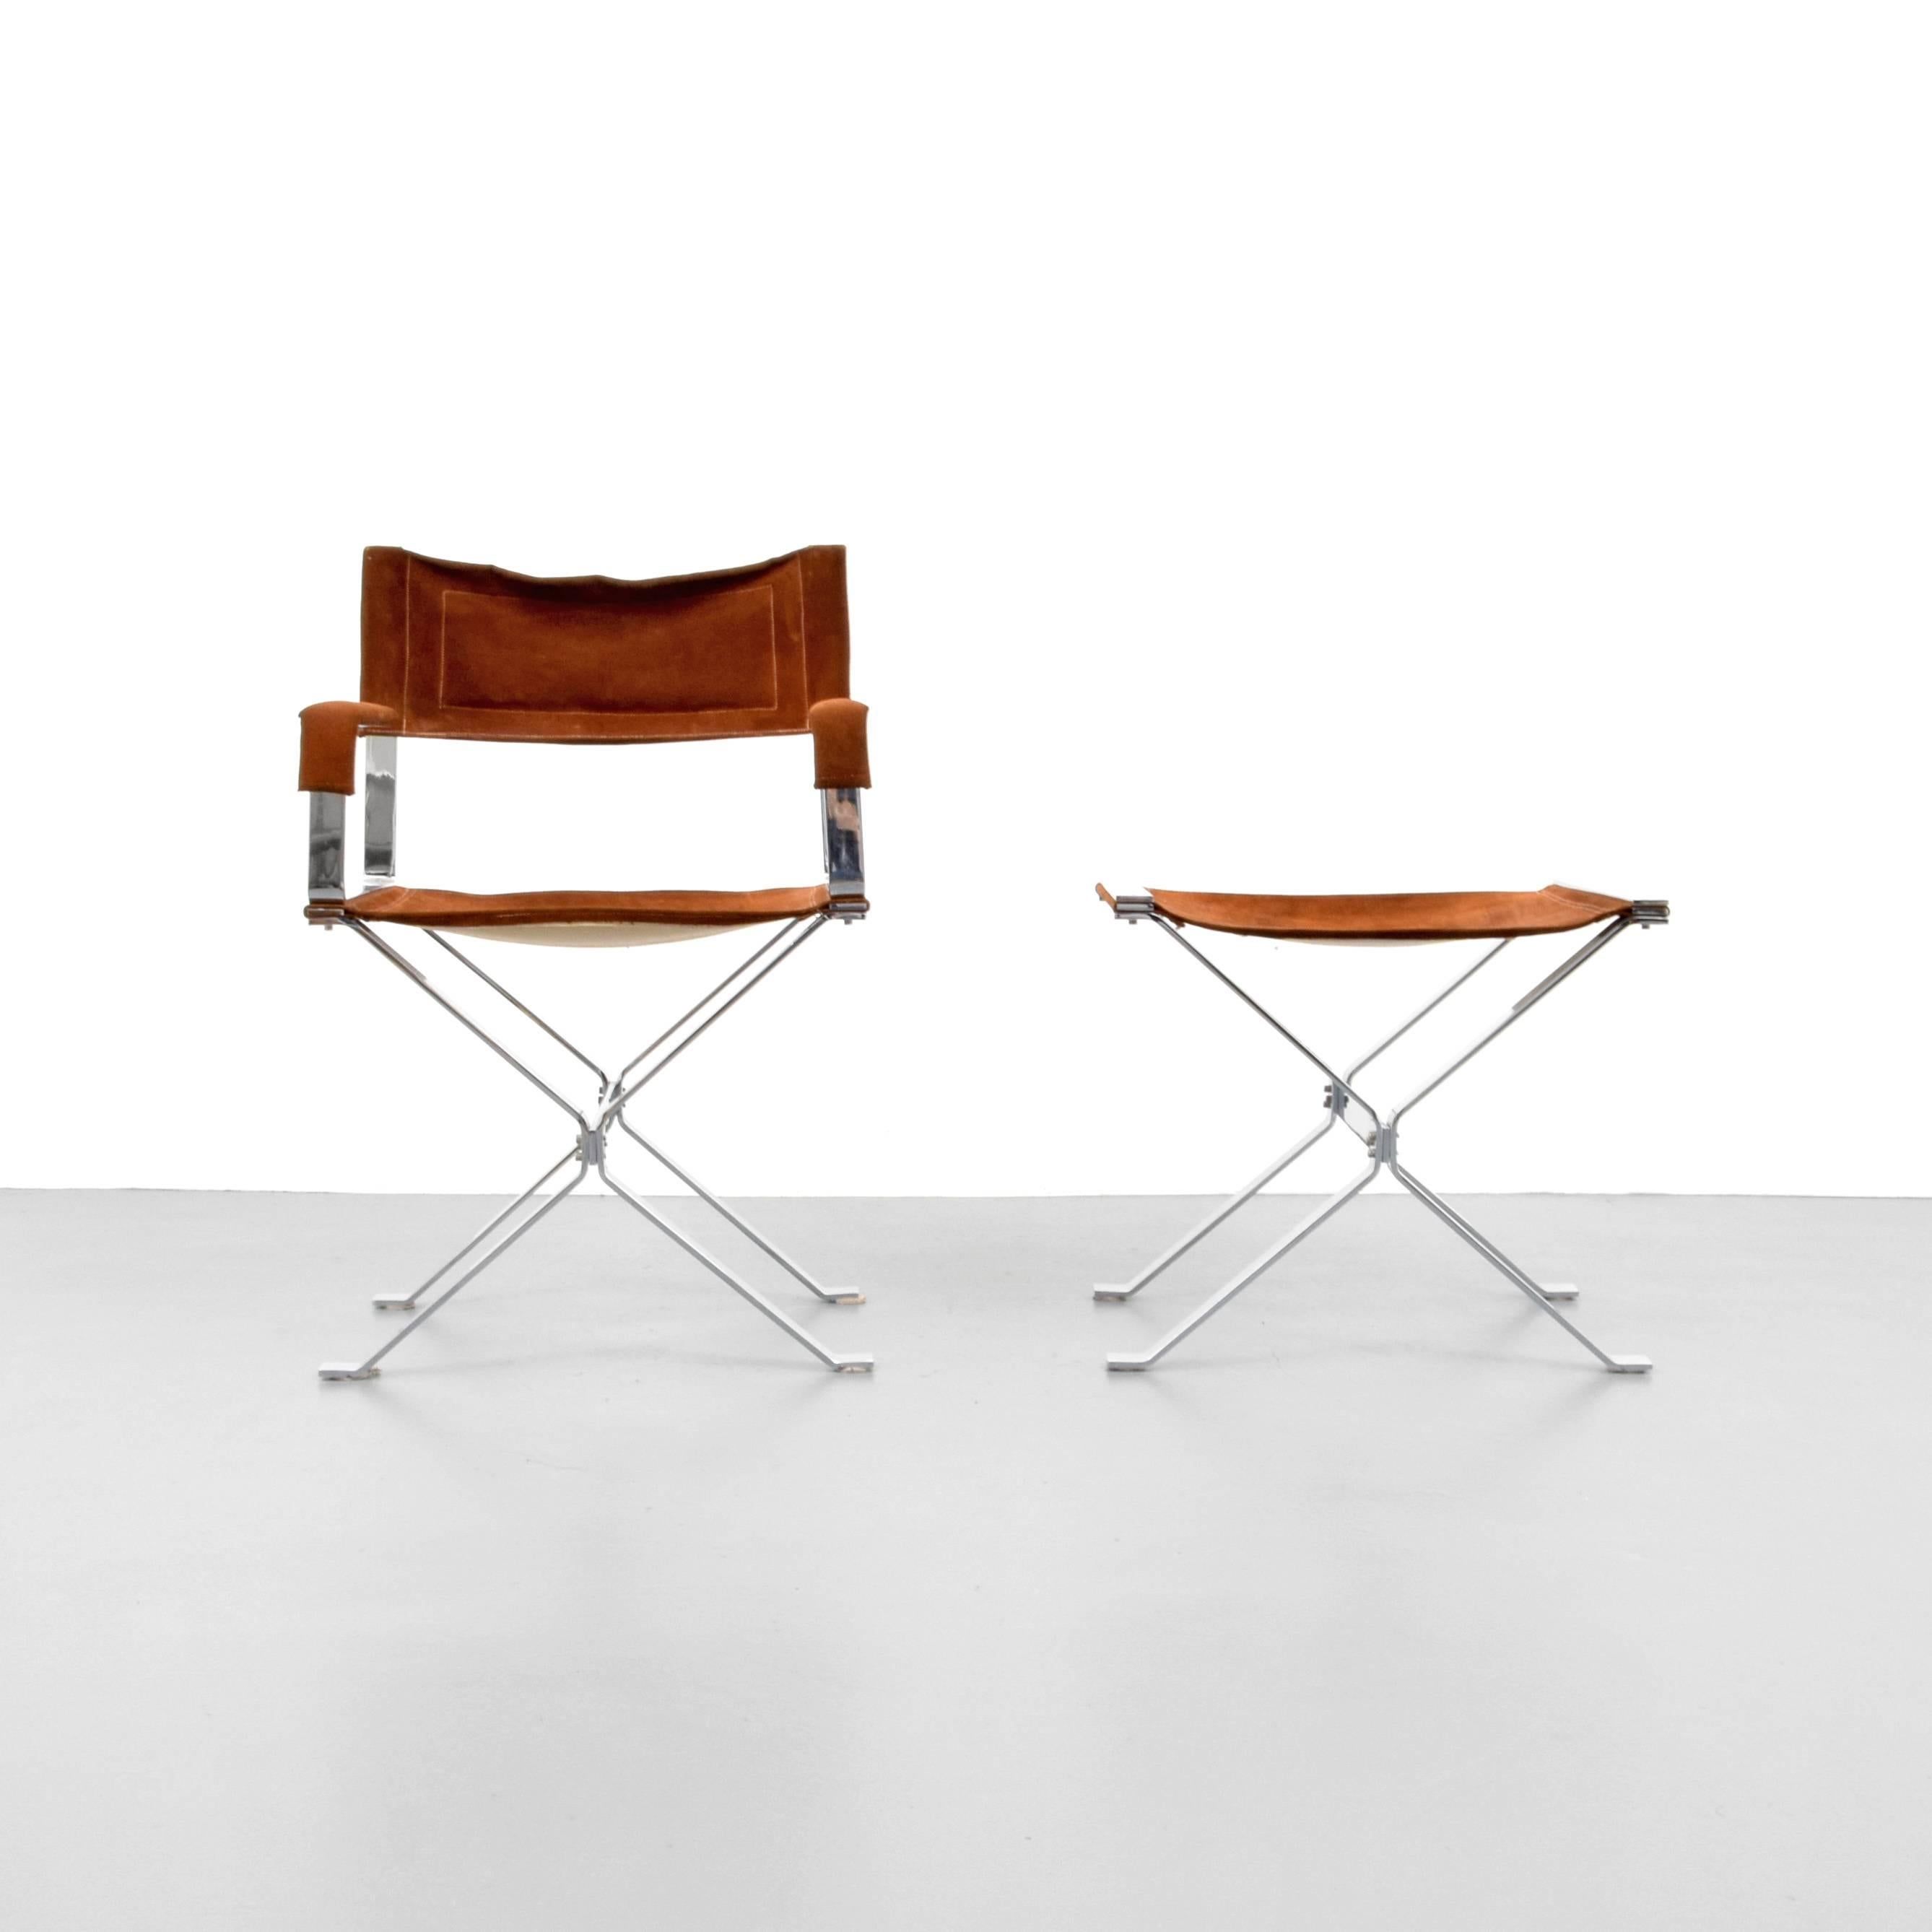 Directors chair and ottoman by Alessandro Albrizzi. 

Dimensions: 35